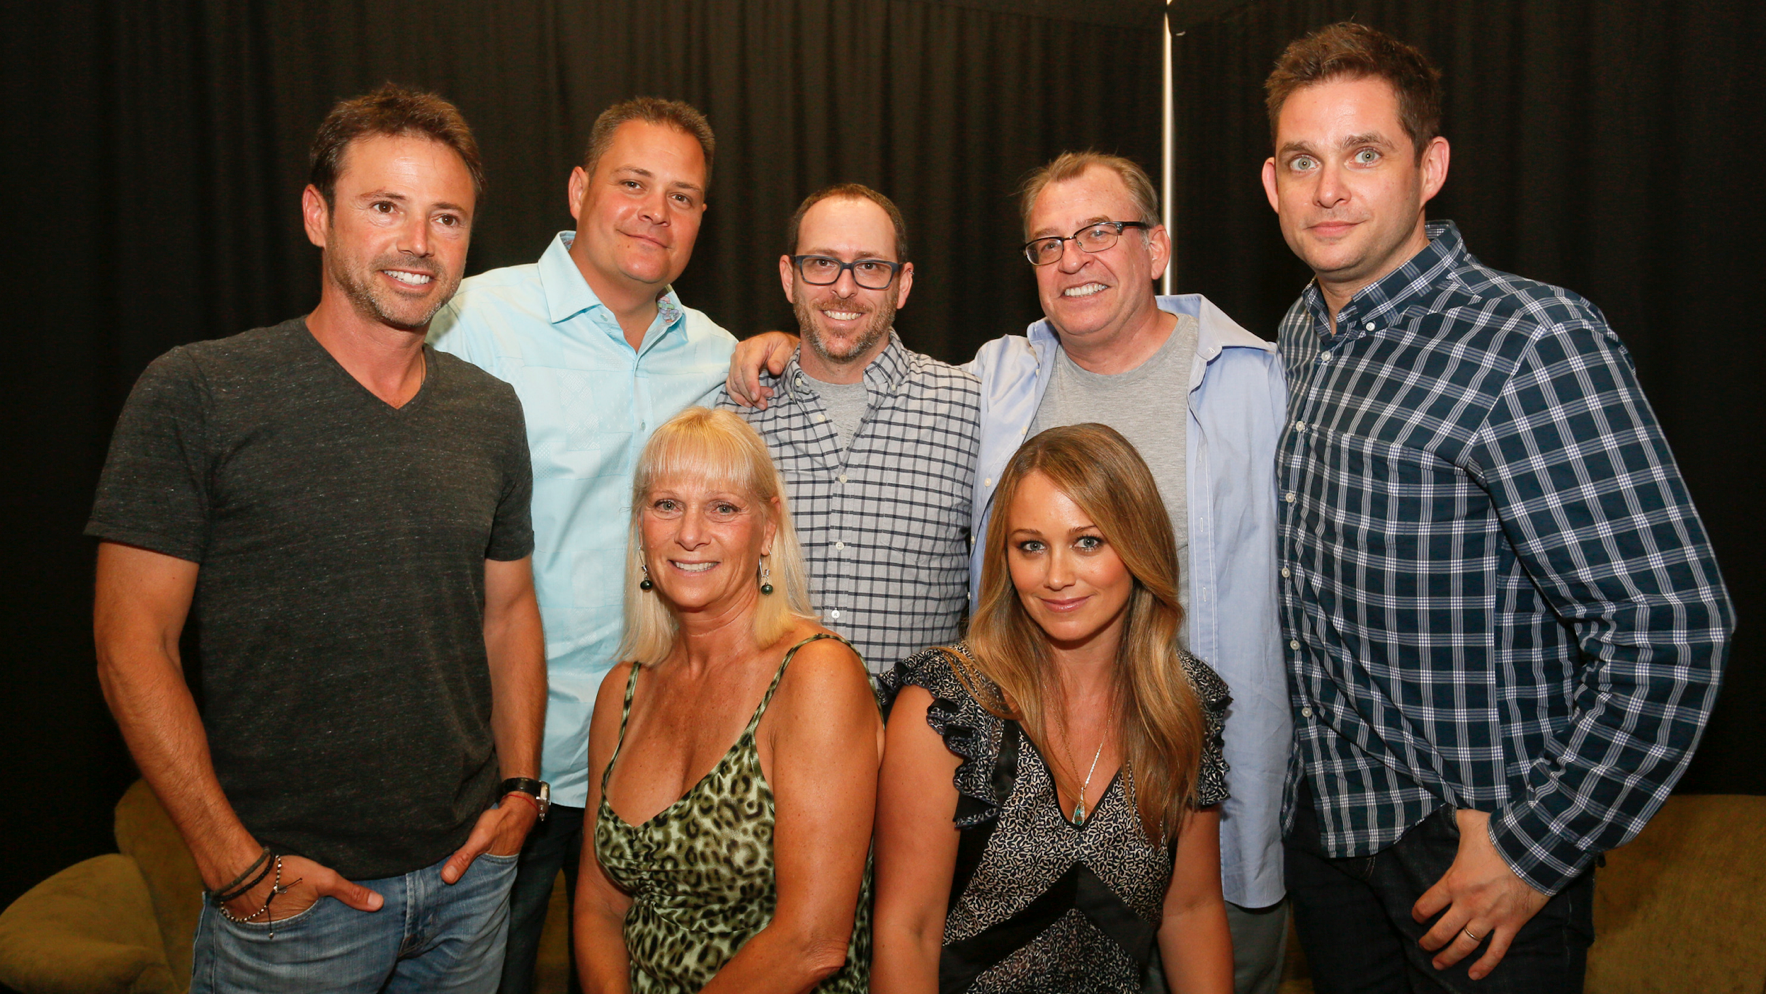 David Lascher, Christine Taylor, and other cast members reunited for Hey Dude's 25th anniversary in 2014